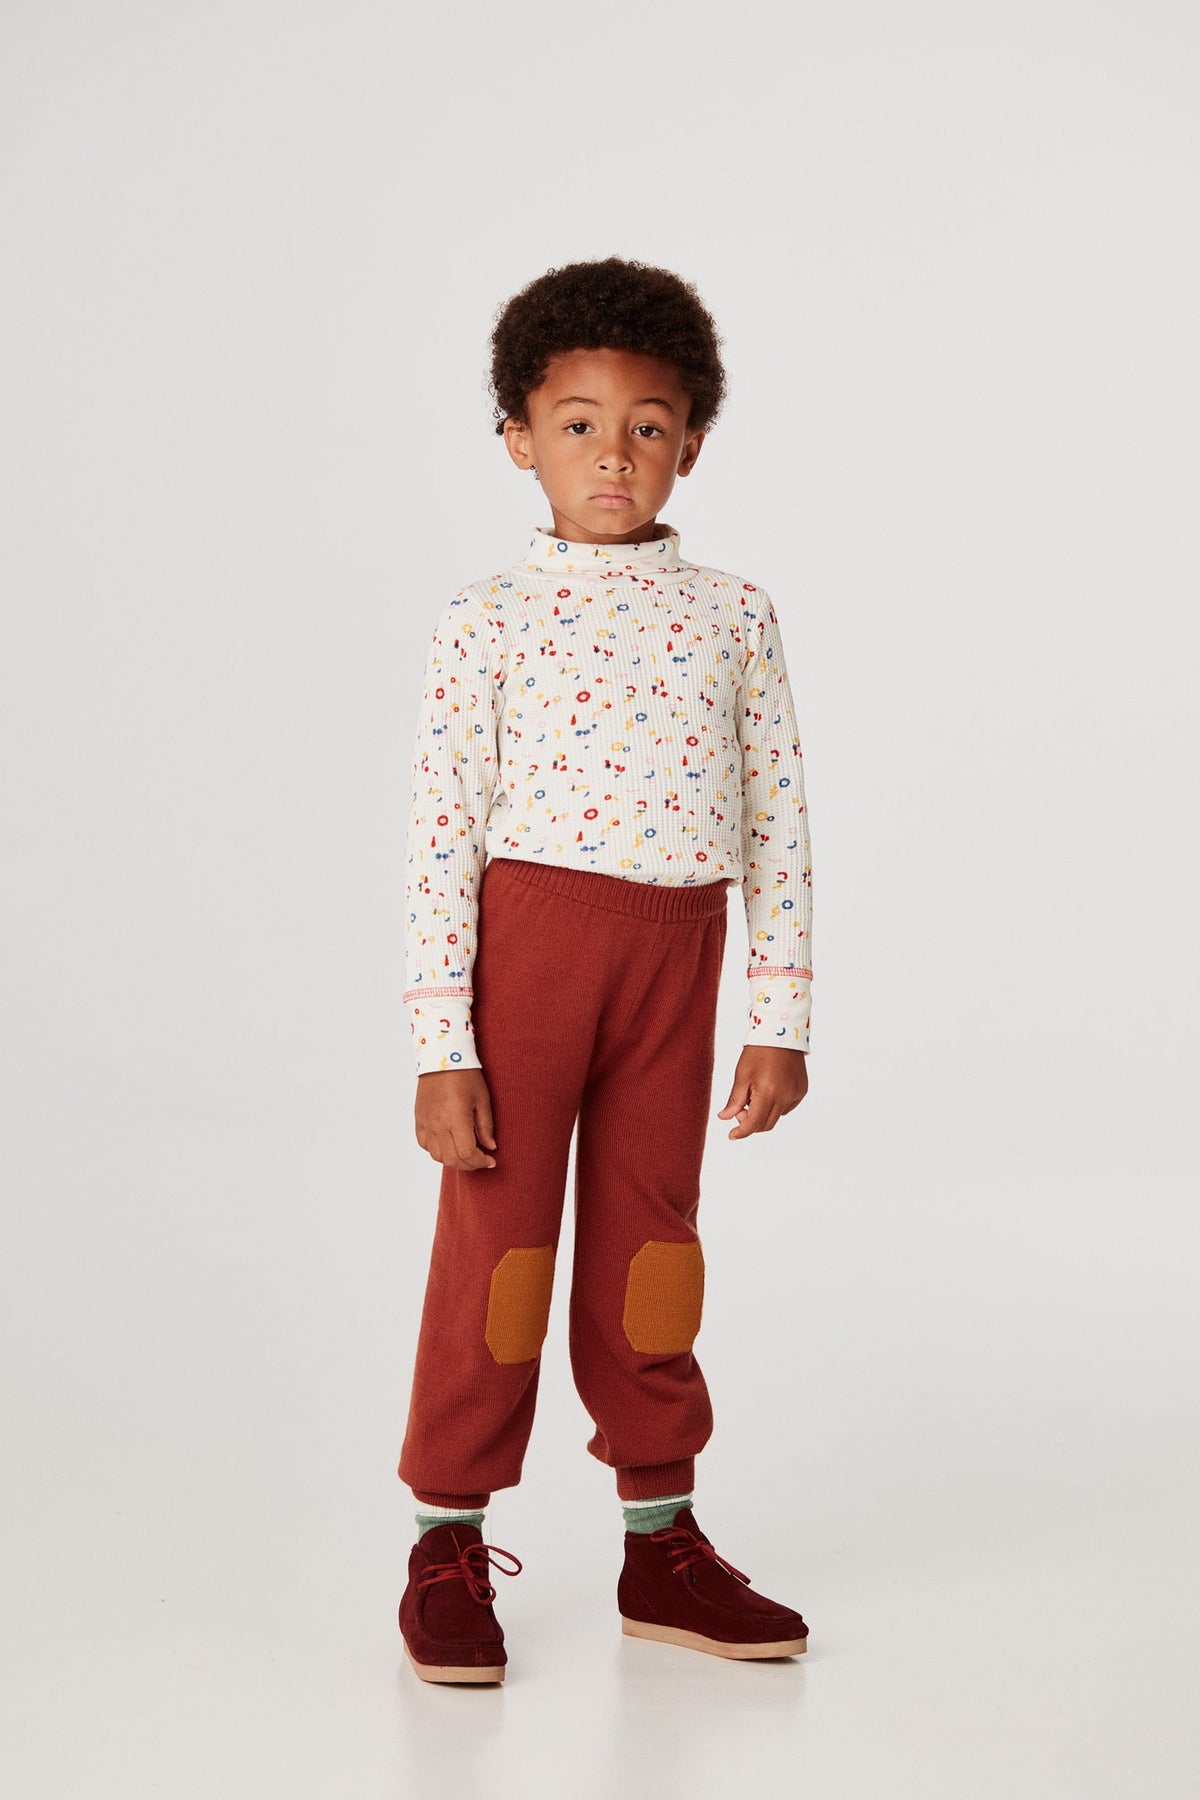 Waffle Turtleneck - Red Flame Shapes+Model is 45 inches tall, 46lbs, wearing a size 4-5y